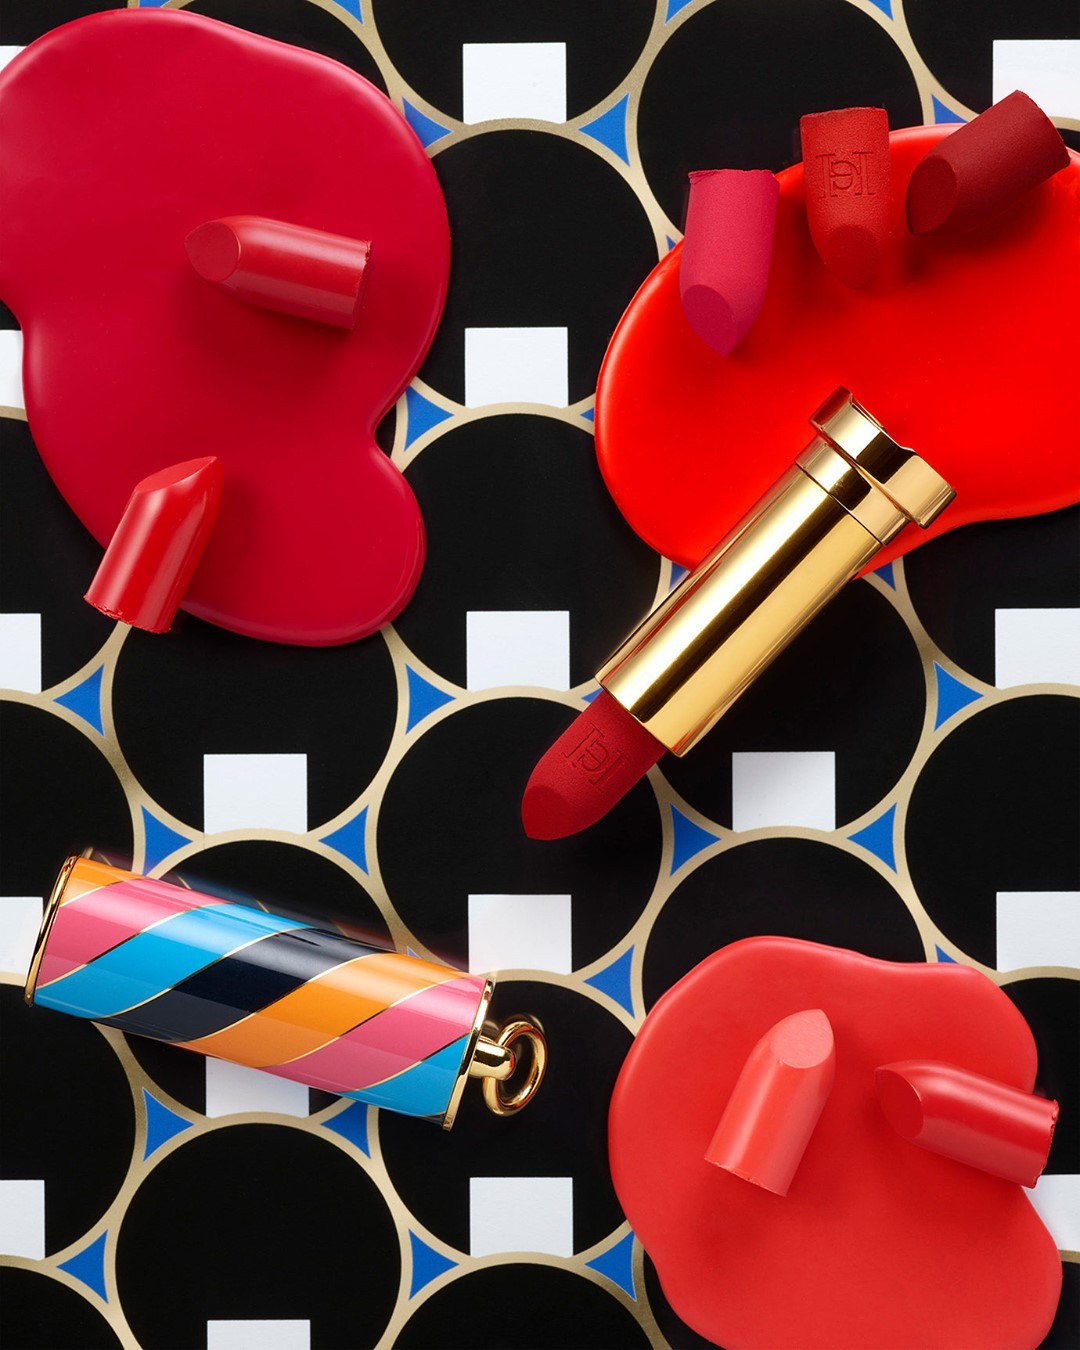 CAROLINA HERRERA - Rediscover your joie de vivre with our Matte lipstick in Alegria (color n° 410). Providing intensely pigmented color, it applies easily thanks to its hydrating formula that keeps li...